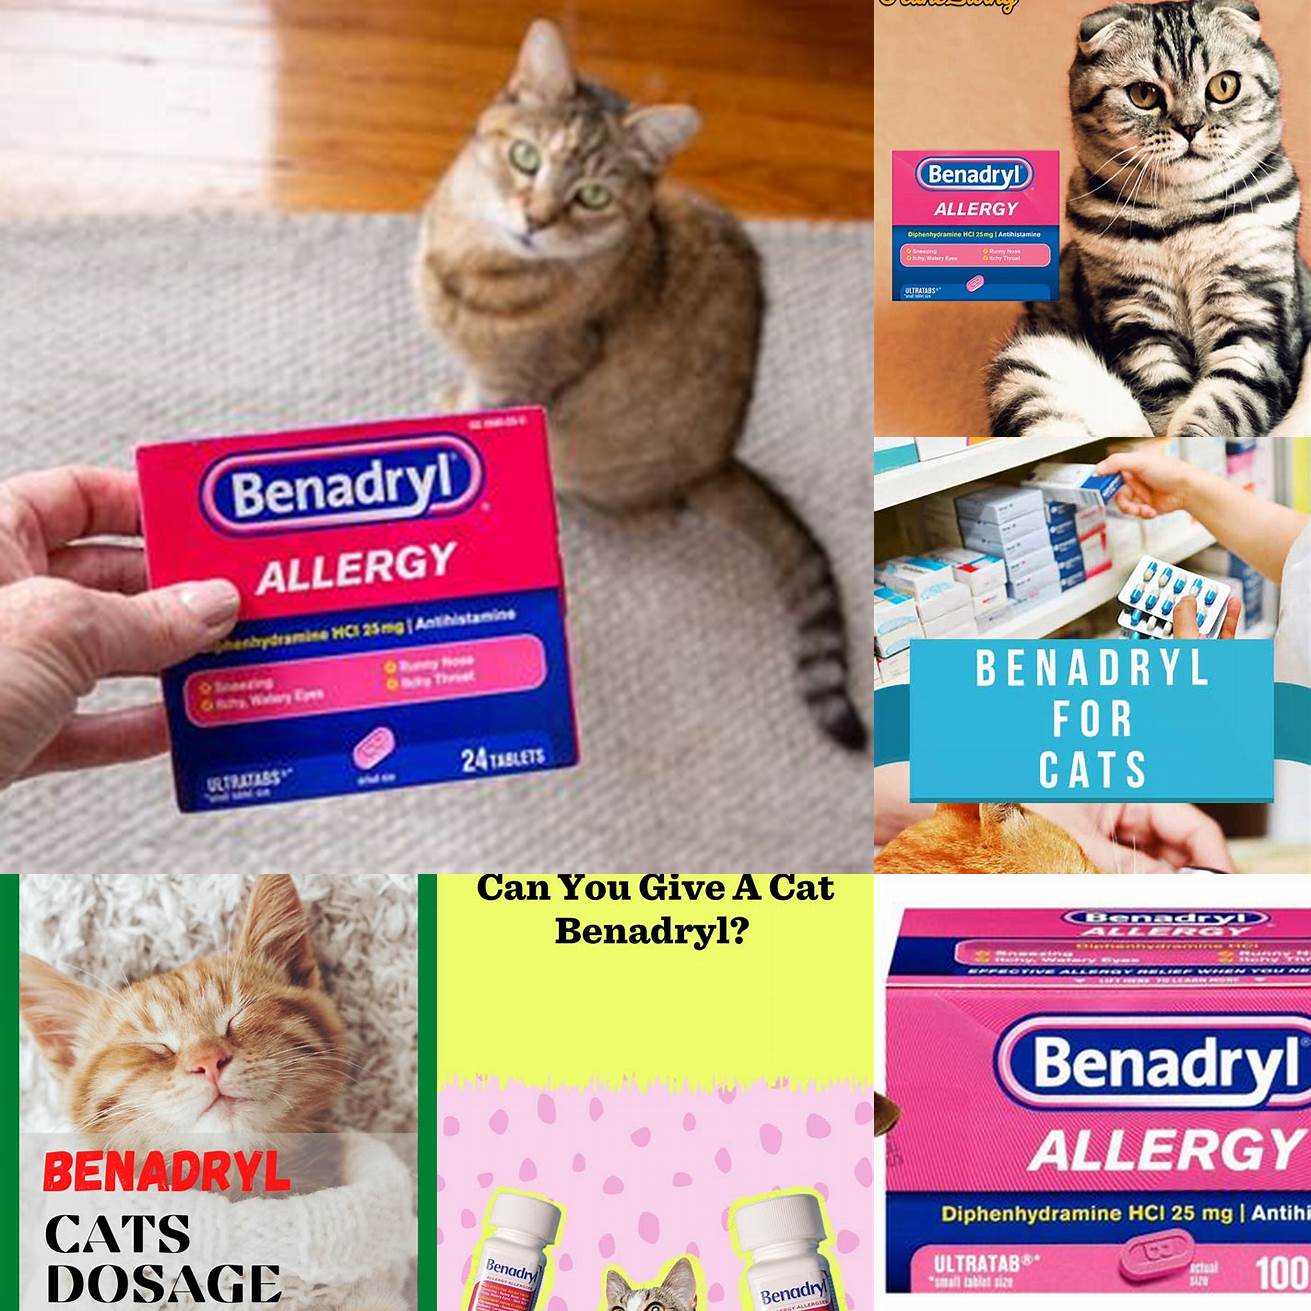 Q Can I give my cat Benadryl for itching